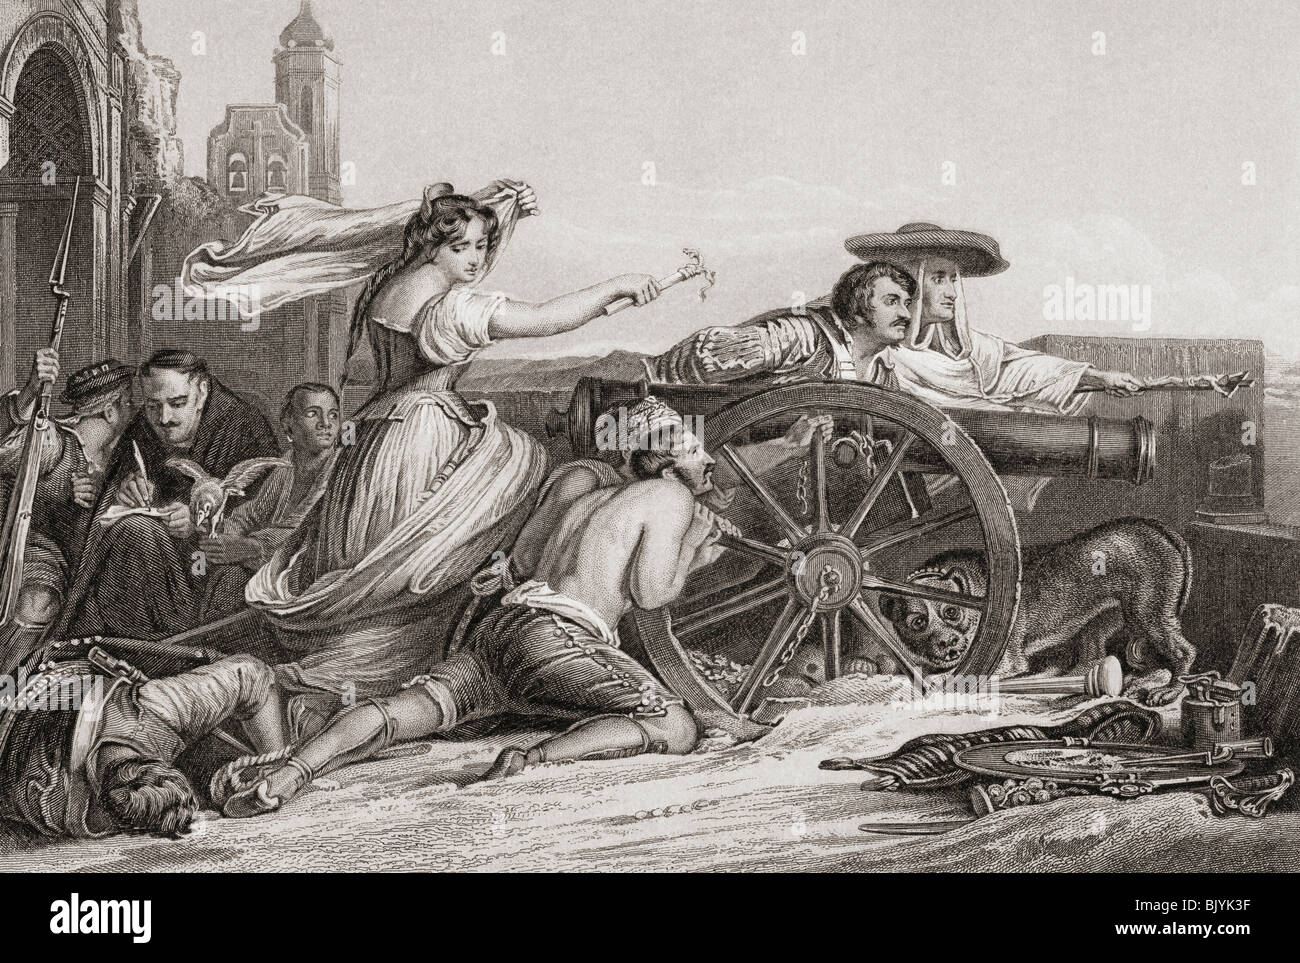 The Defence of Saragossa, Spain, 1808-9. Augustina, The Maid of Saragossa serving in the batteries. Stock Photo